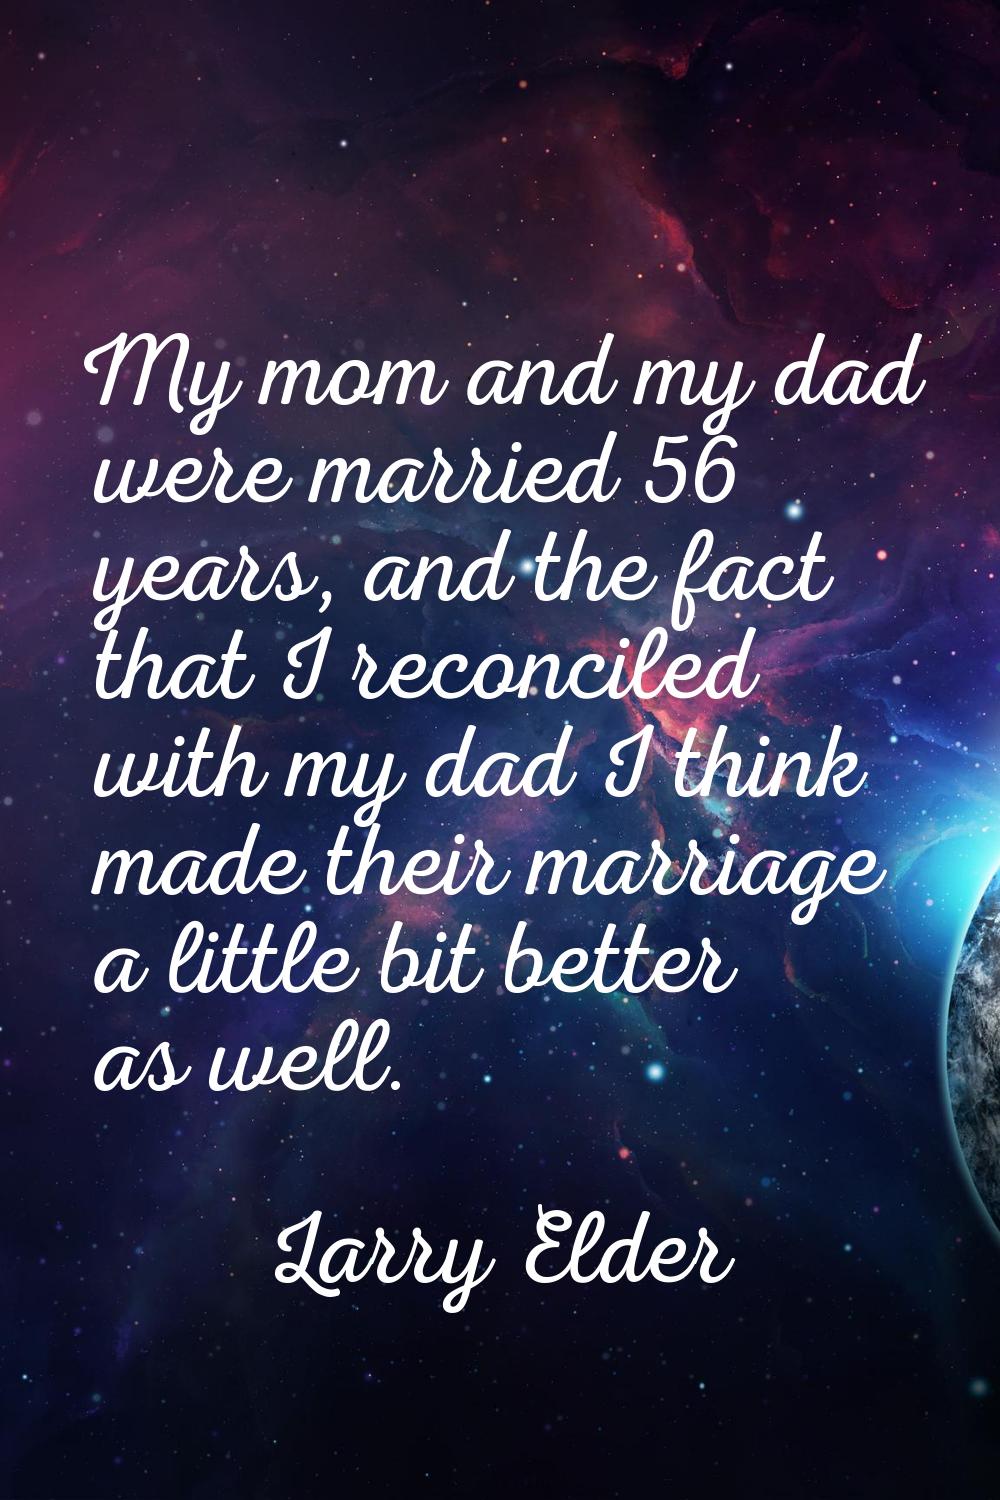 My mom and my dad were married 56 years, and the fact that I reconciled with my dad I think made th